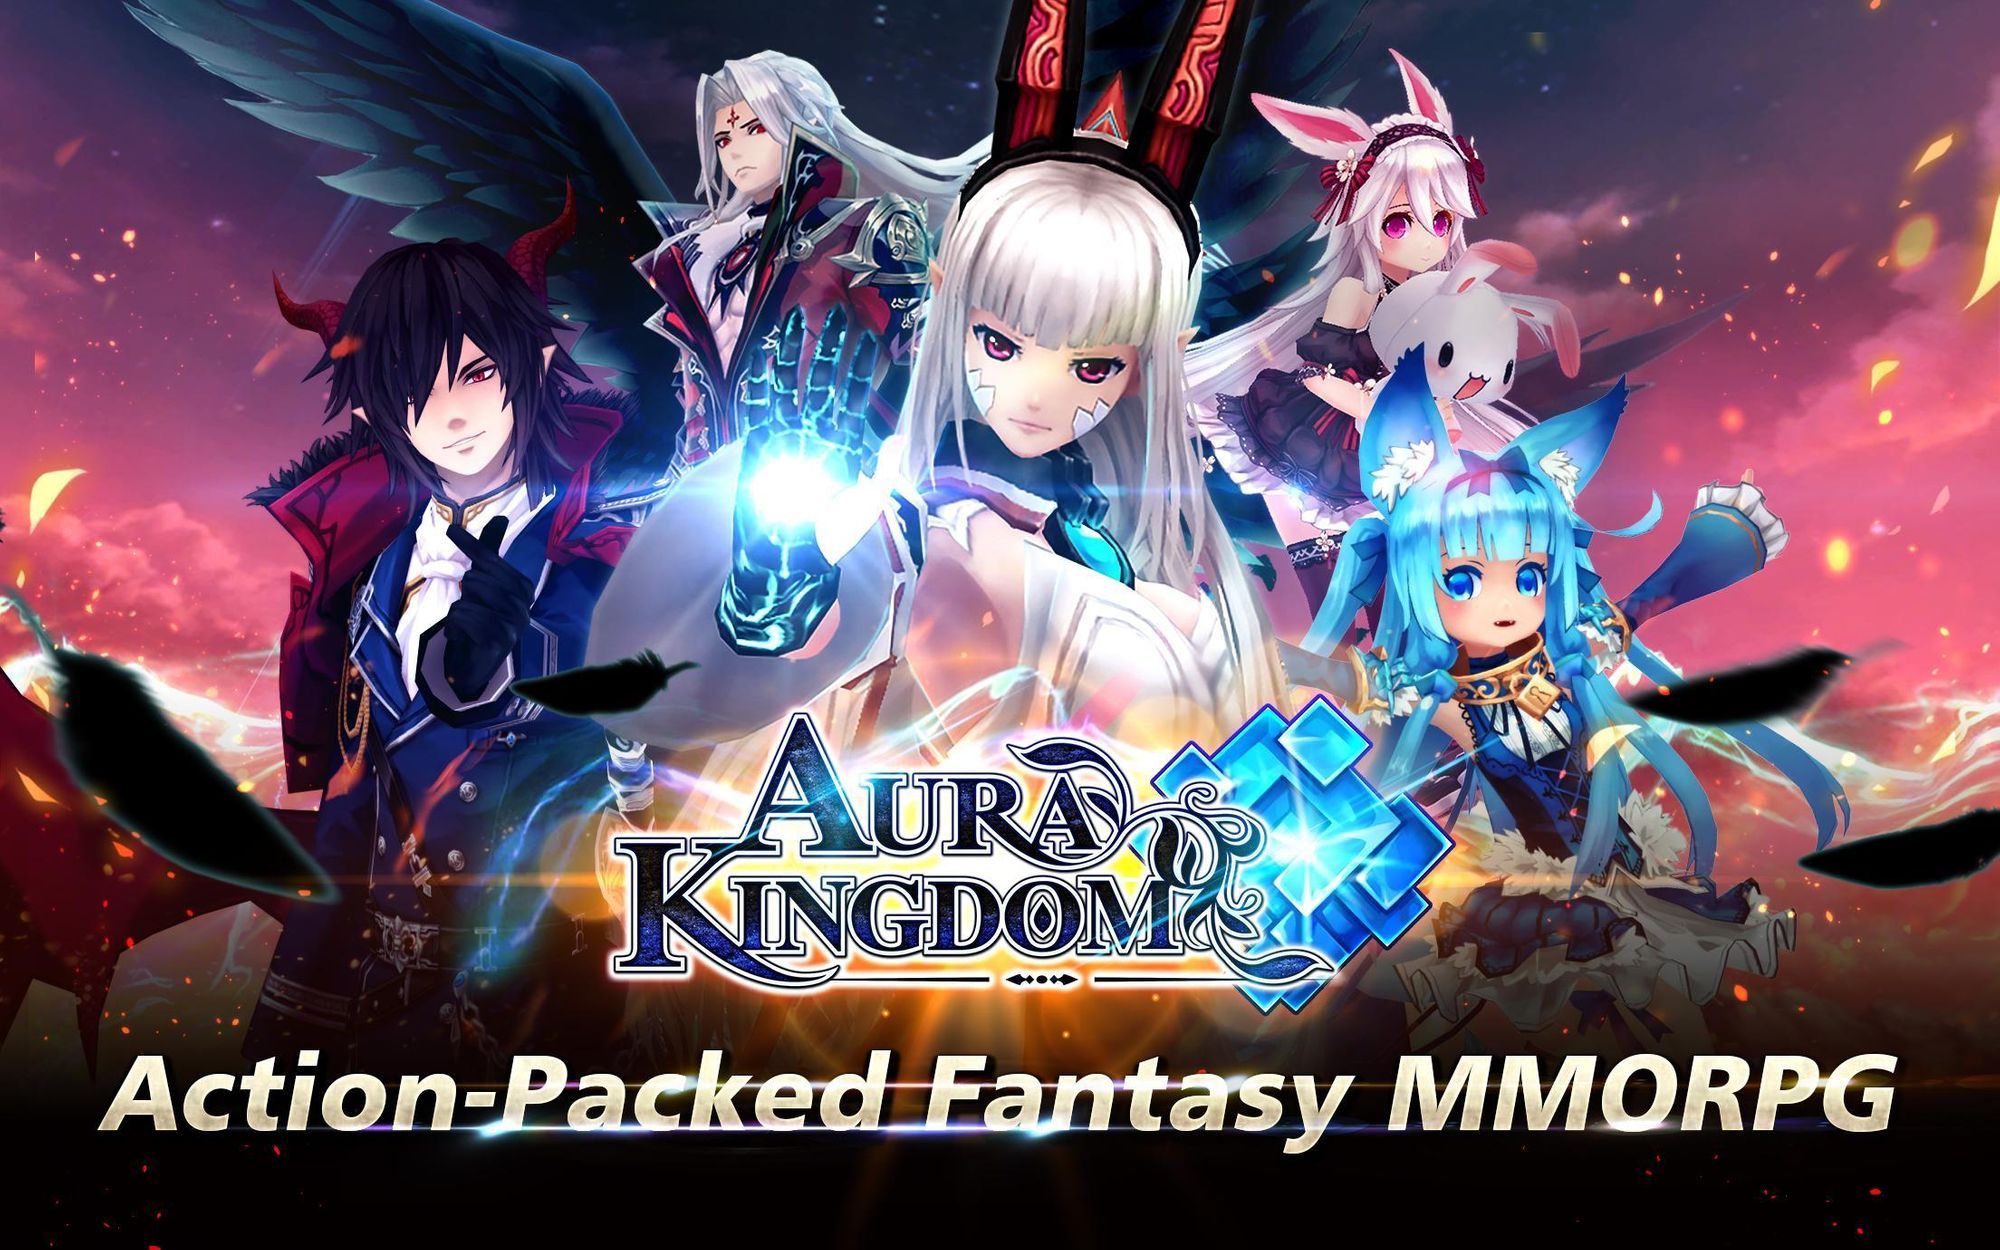 The release of the global version of MMORPG Aura Kingdom 2